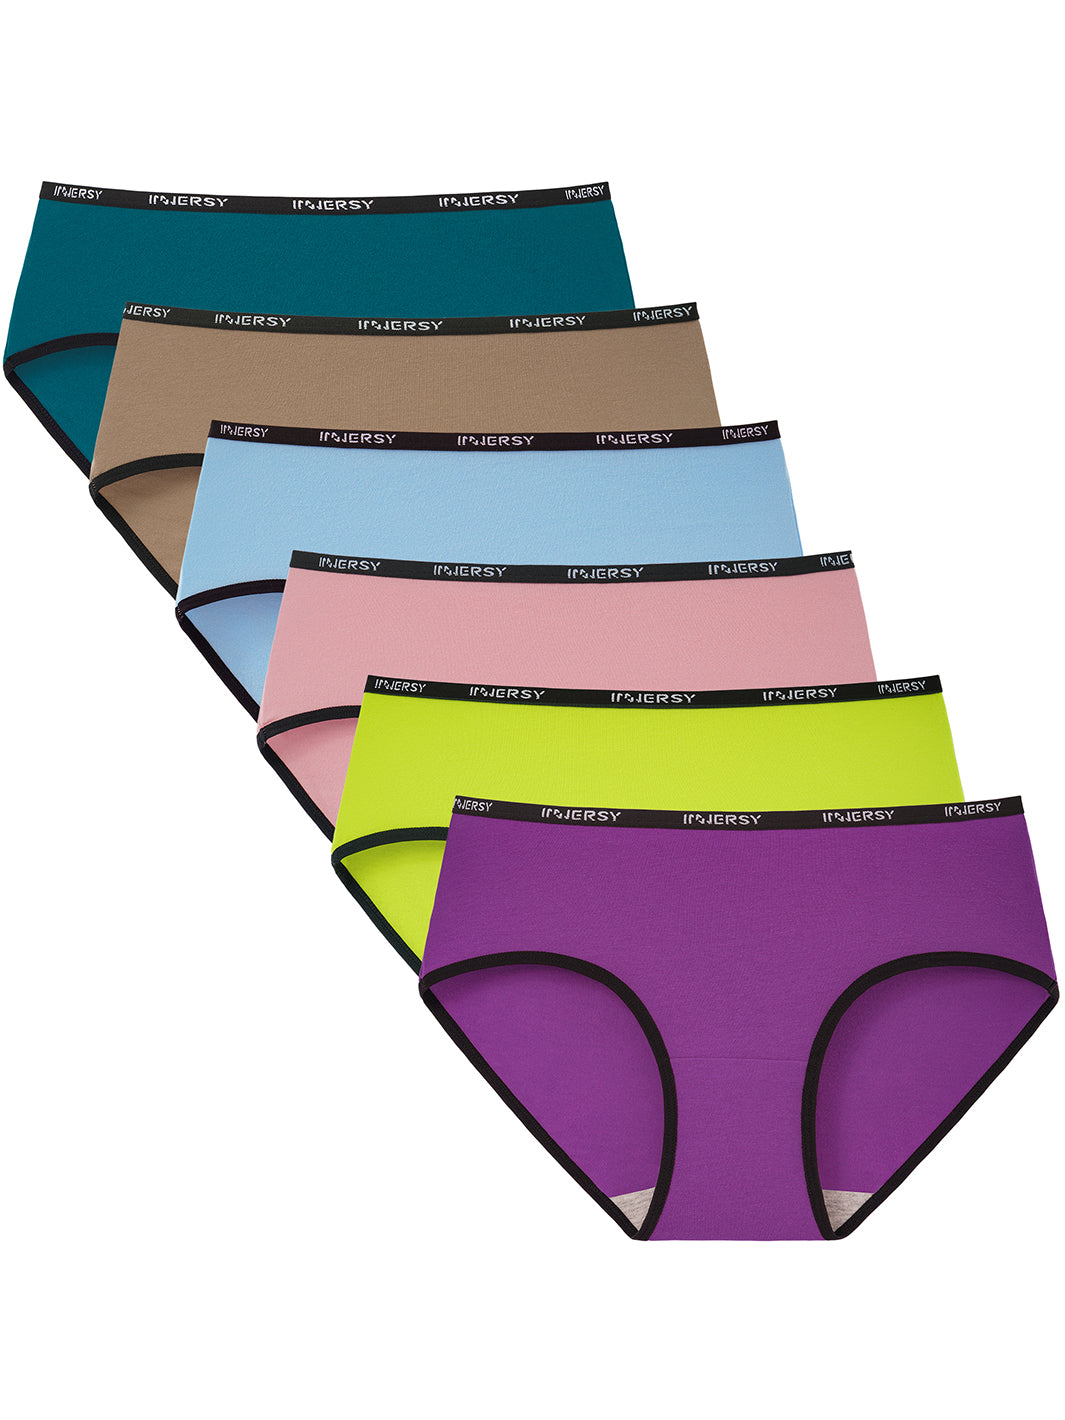 Innersy Womens Underwear Cotton Seamless Hipster Panties Pack of 5 (XL,  Multi-color) 